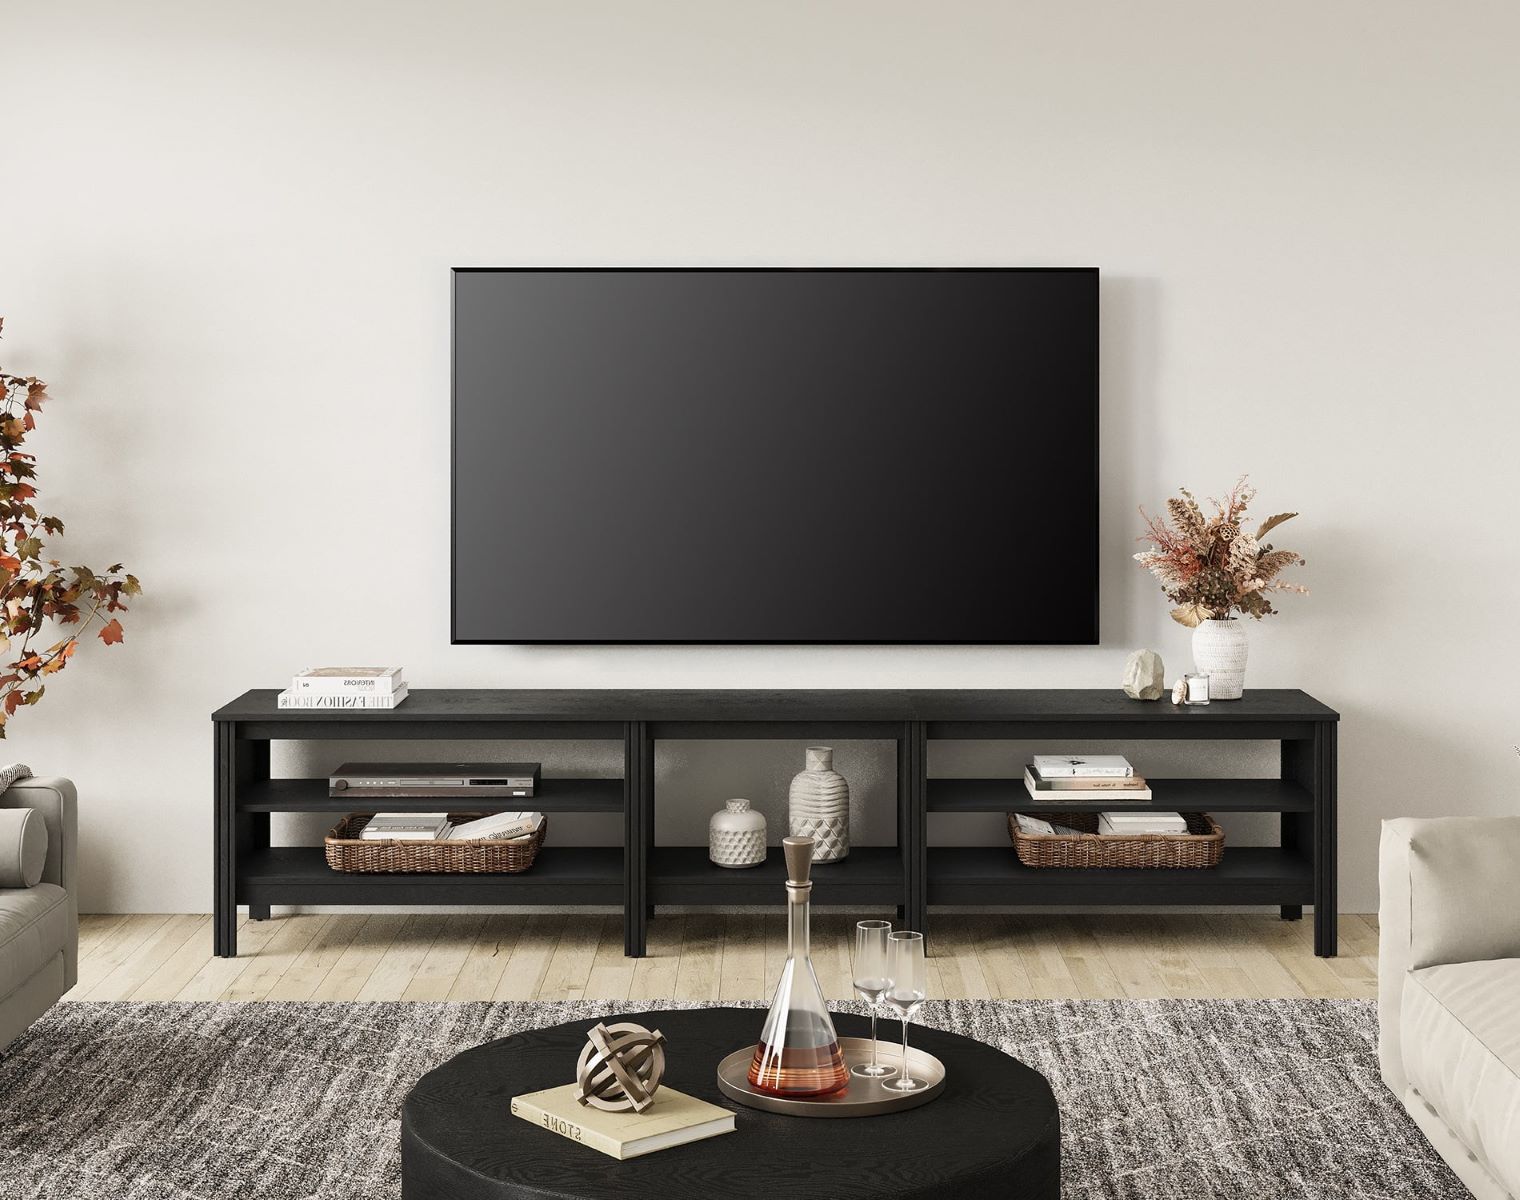 How To Assemble A TV Stand